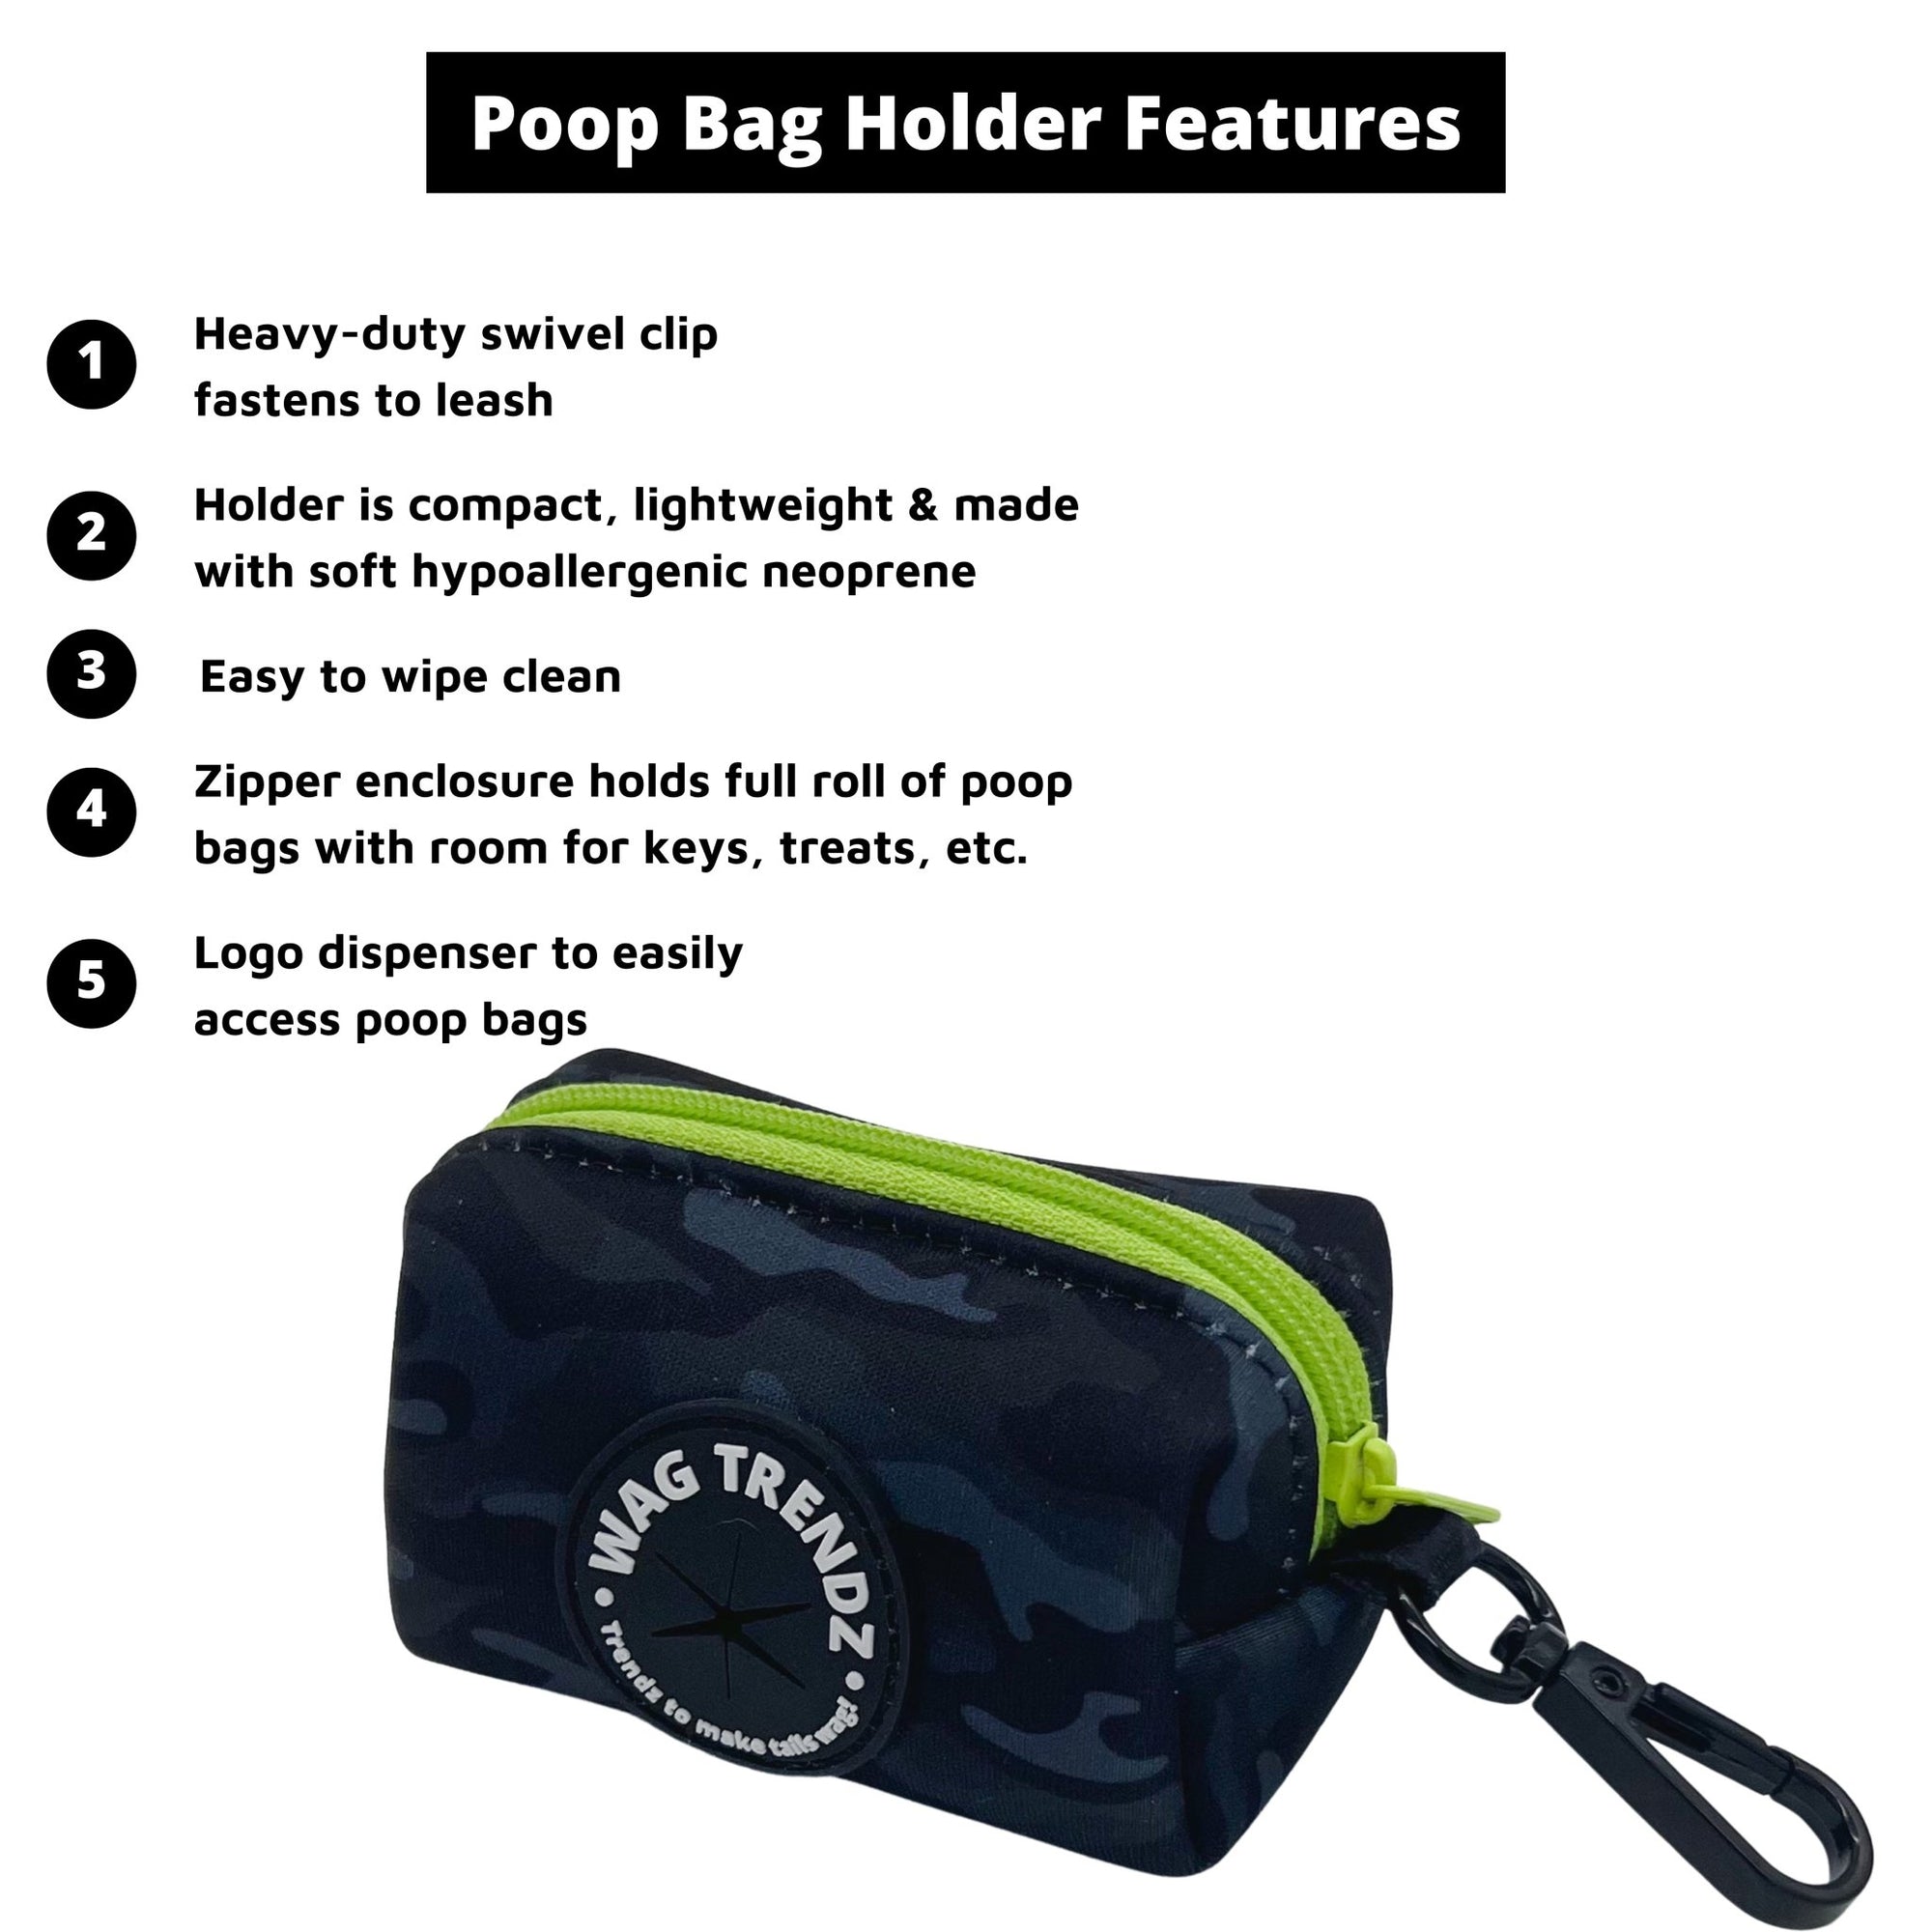 Dog Poo Bag Holder in black and gray camo with Hi Vis accents - with product feature captions - against solid white background - Wag Trendz